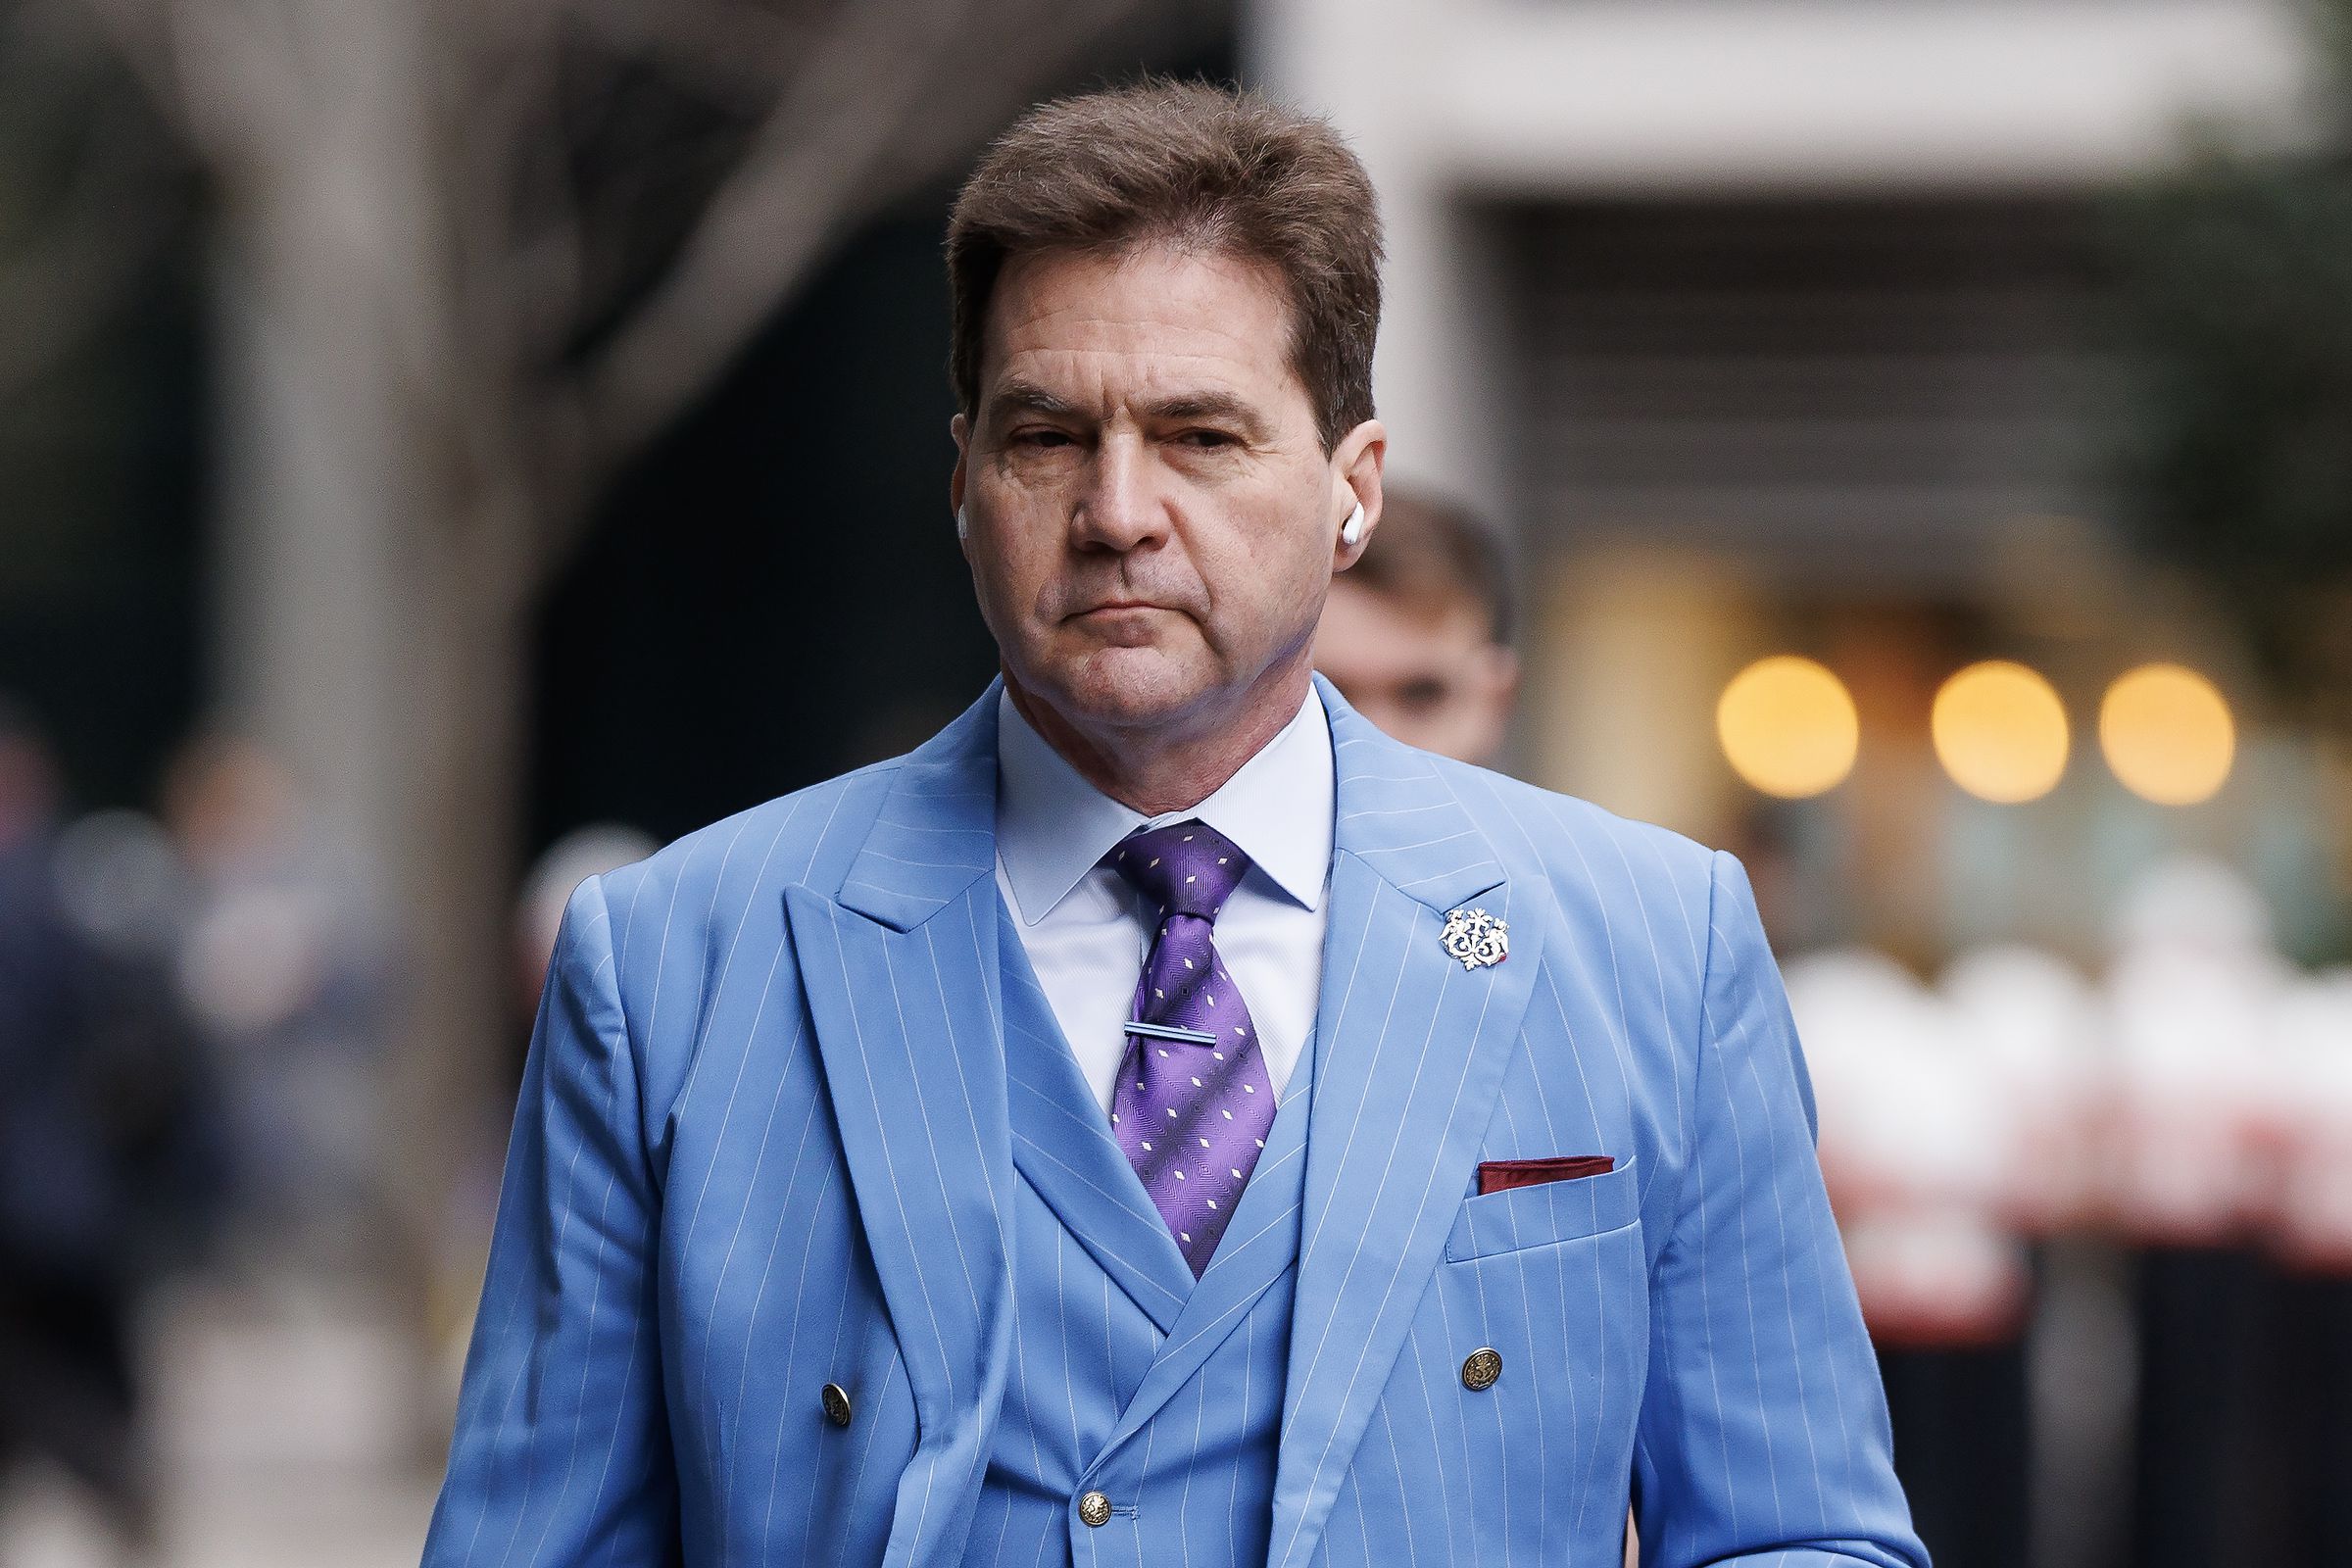 Judge Mellor ruled that Craig Wright (pictured) lied “extensively and repeatedly” about being Satoshi Nakamoto.